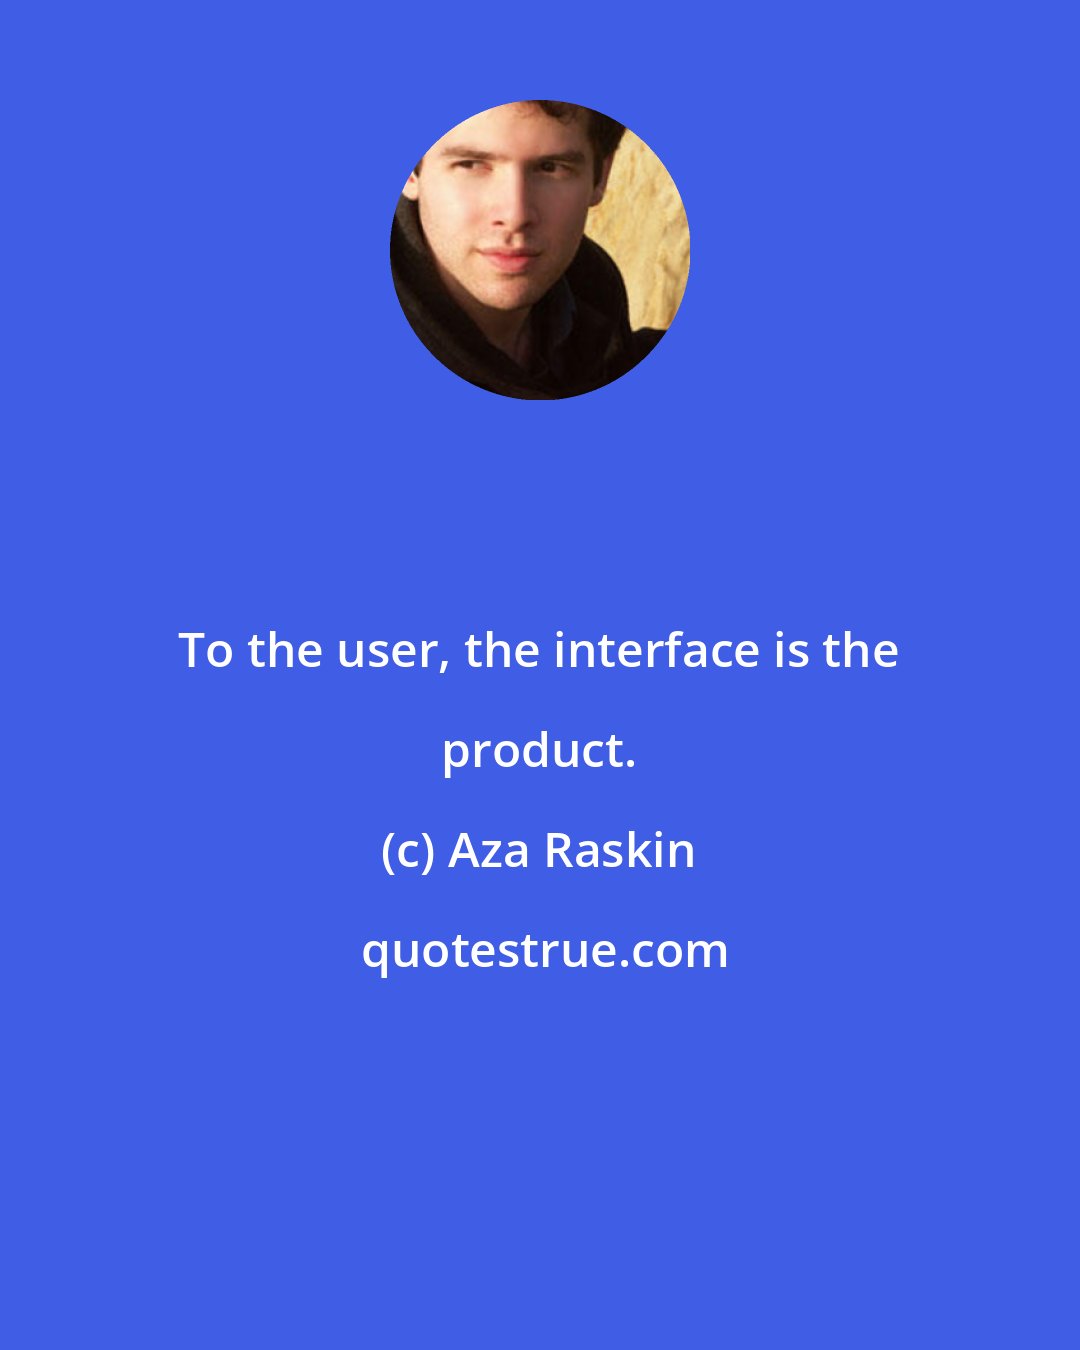 Aza Raskin: To the user, the interface is the product.